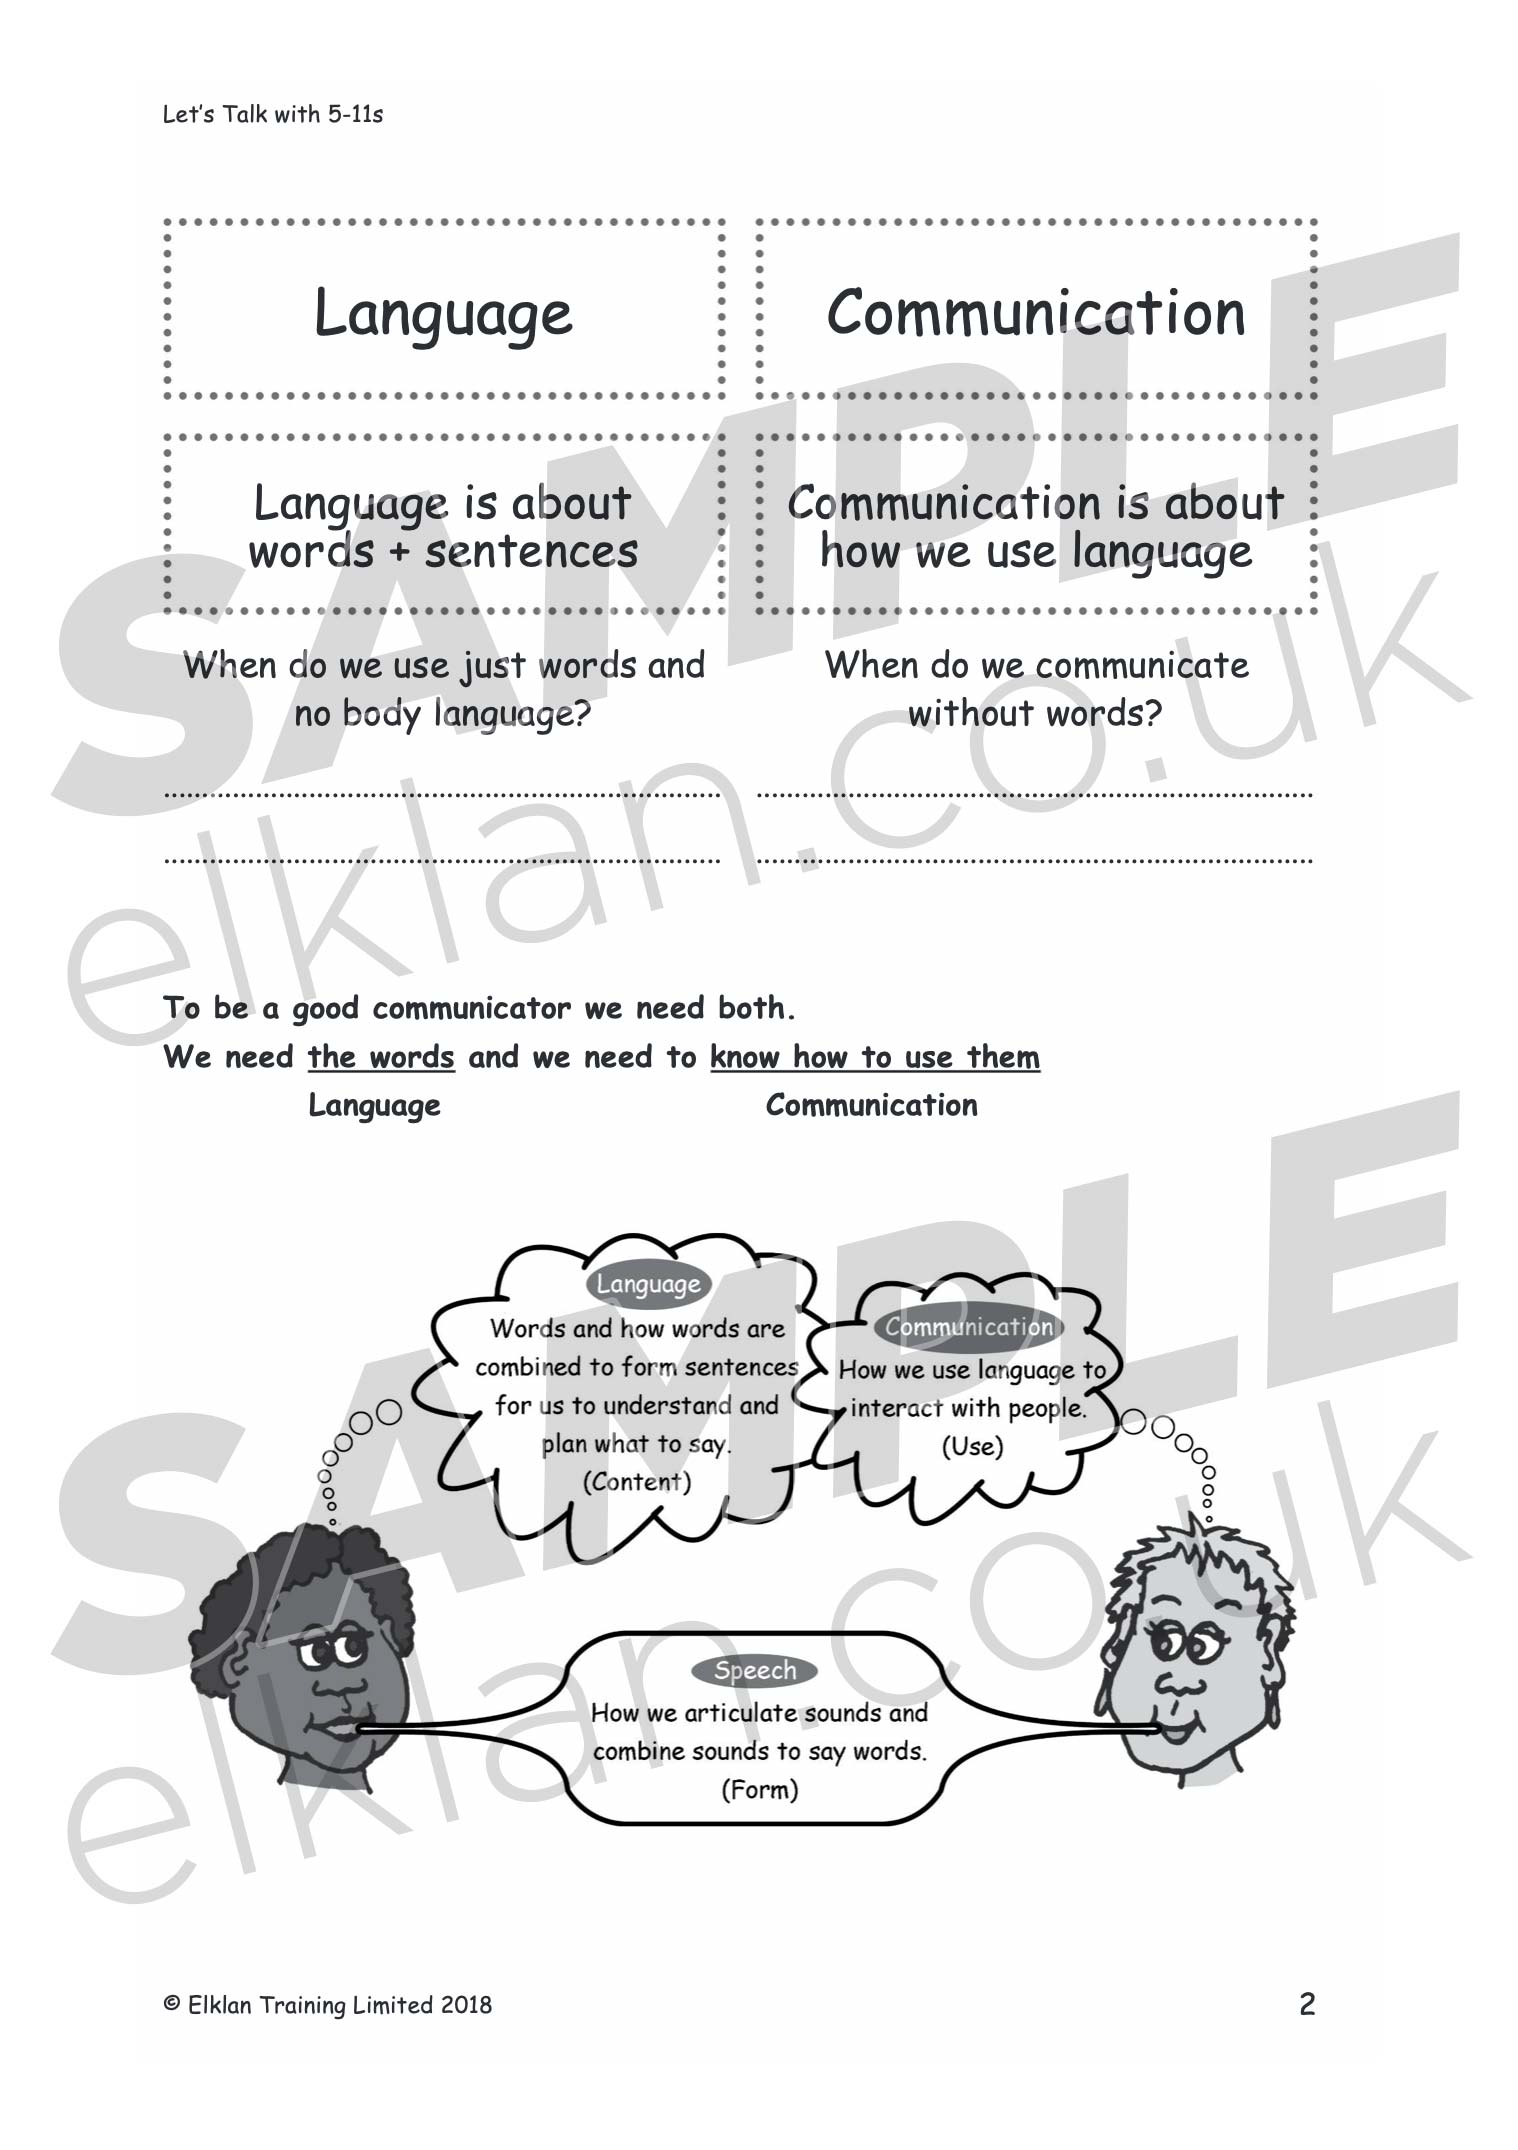 Let's Talk with 5-11s workbook sample image